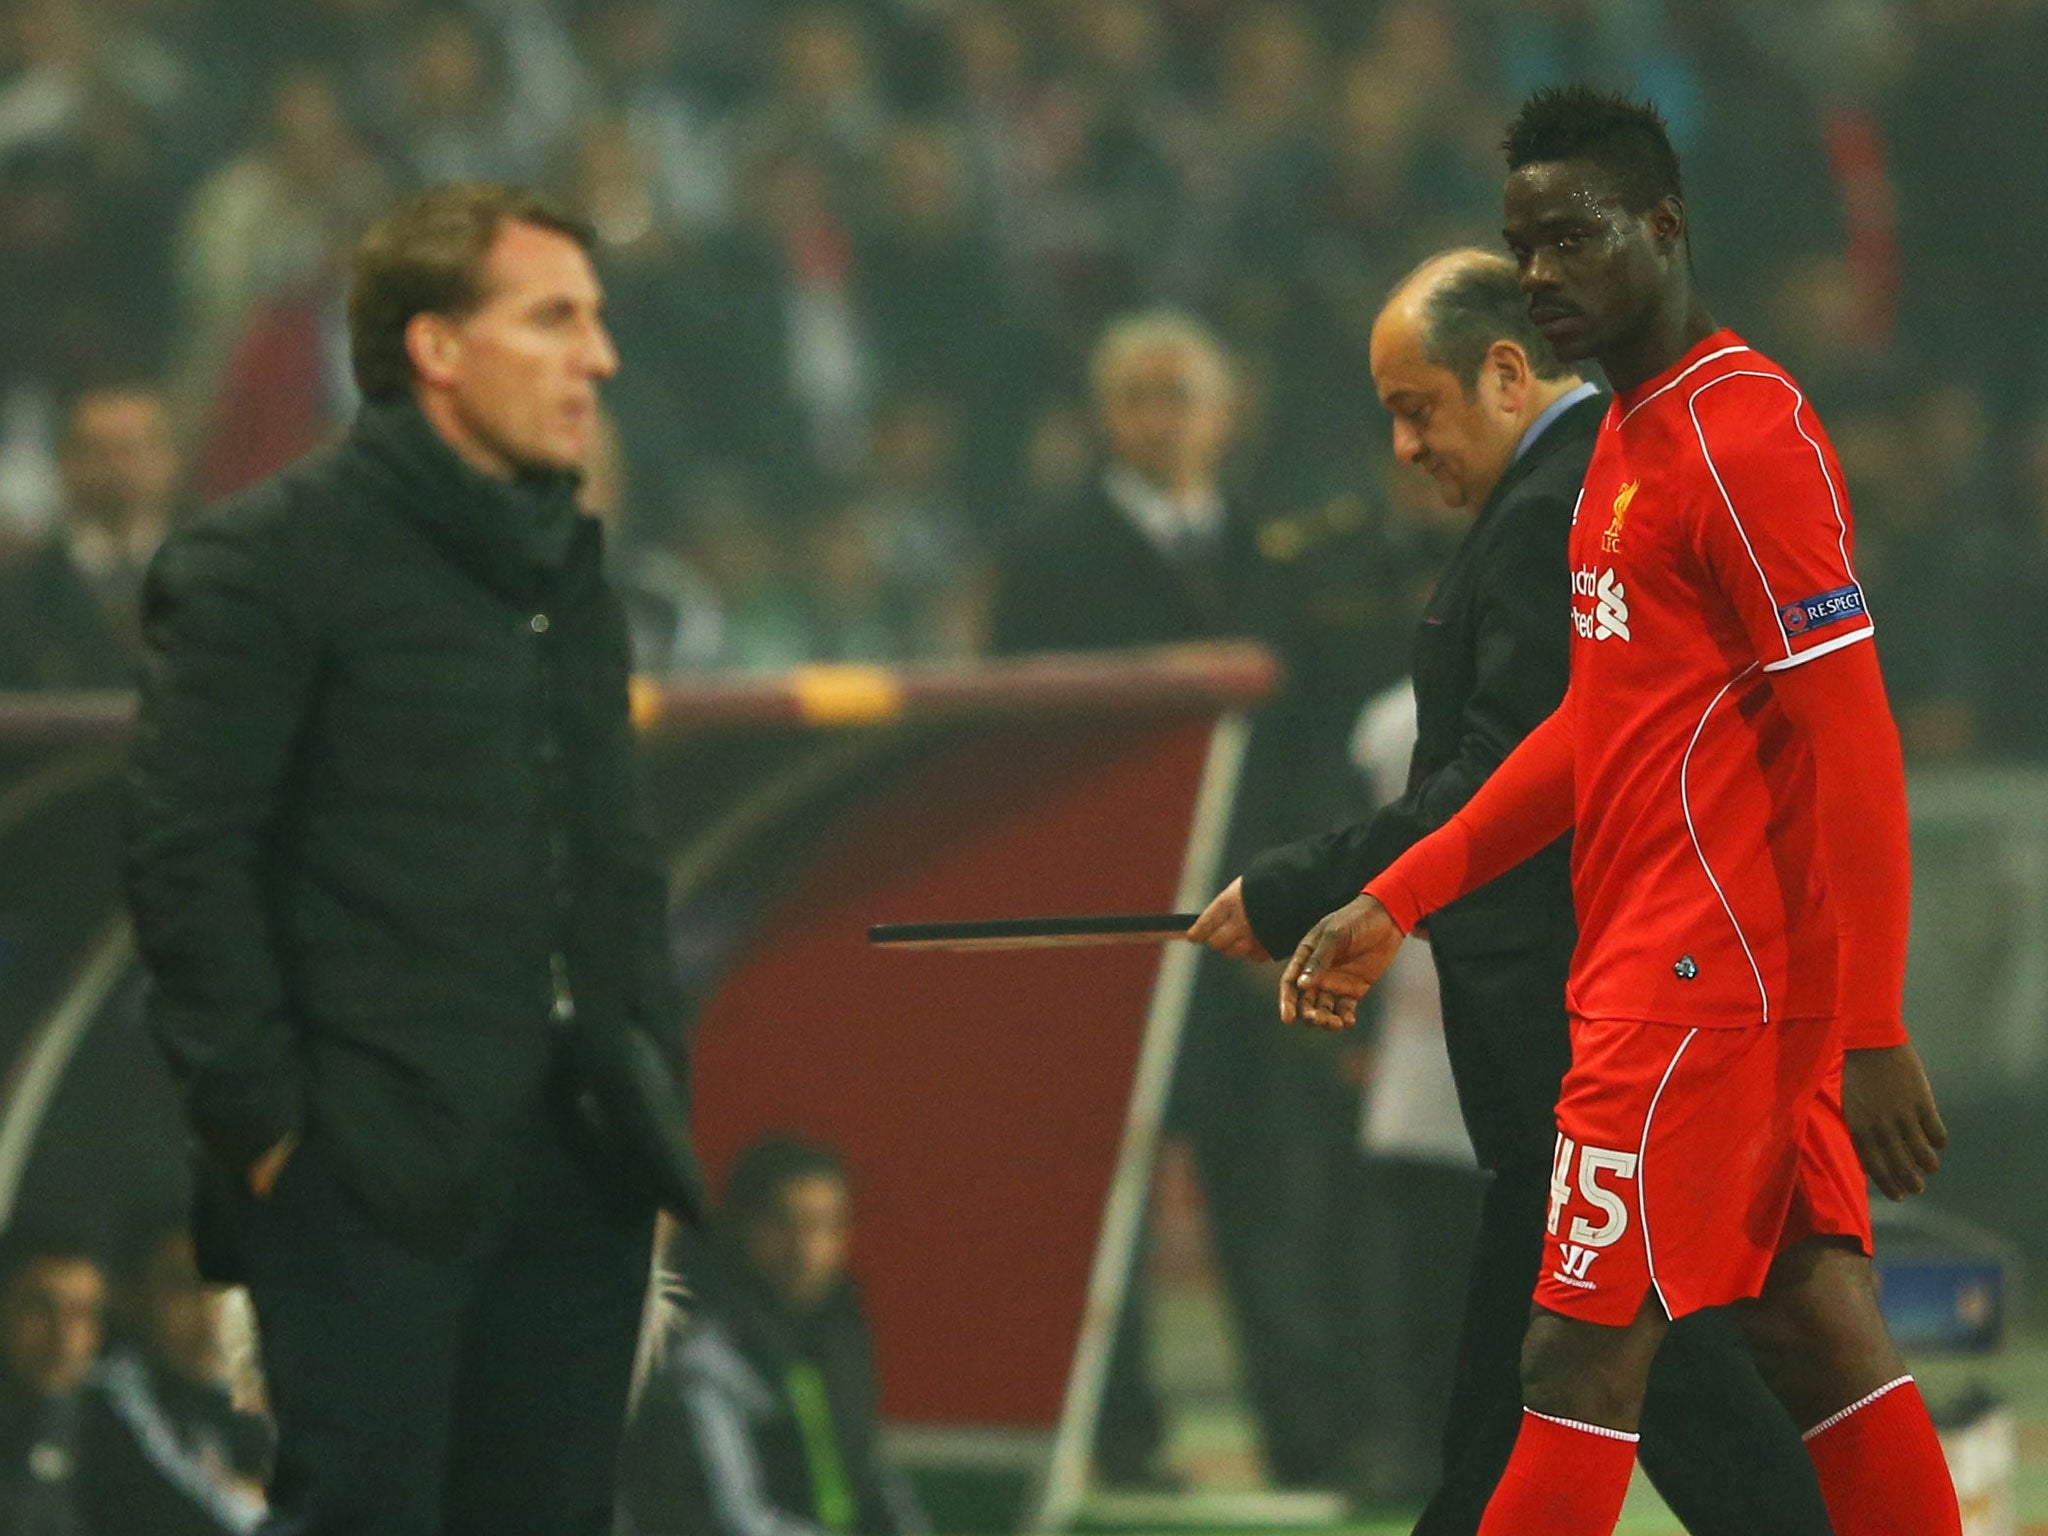 Balotelli glances across to manager Brendan Rodgers as he is substituted in the 82nd minute against in the second leg v Besiktas